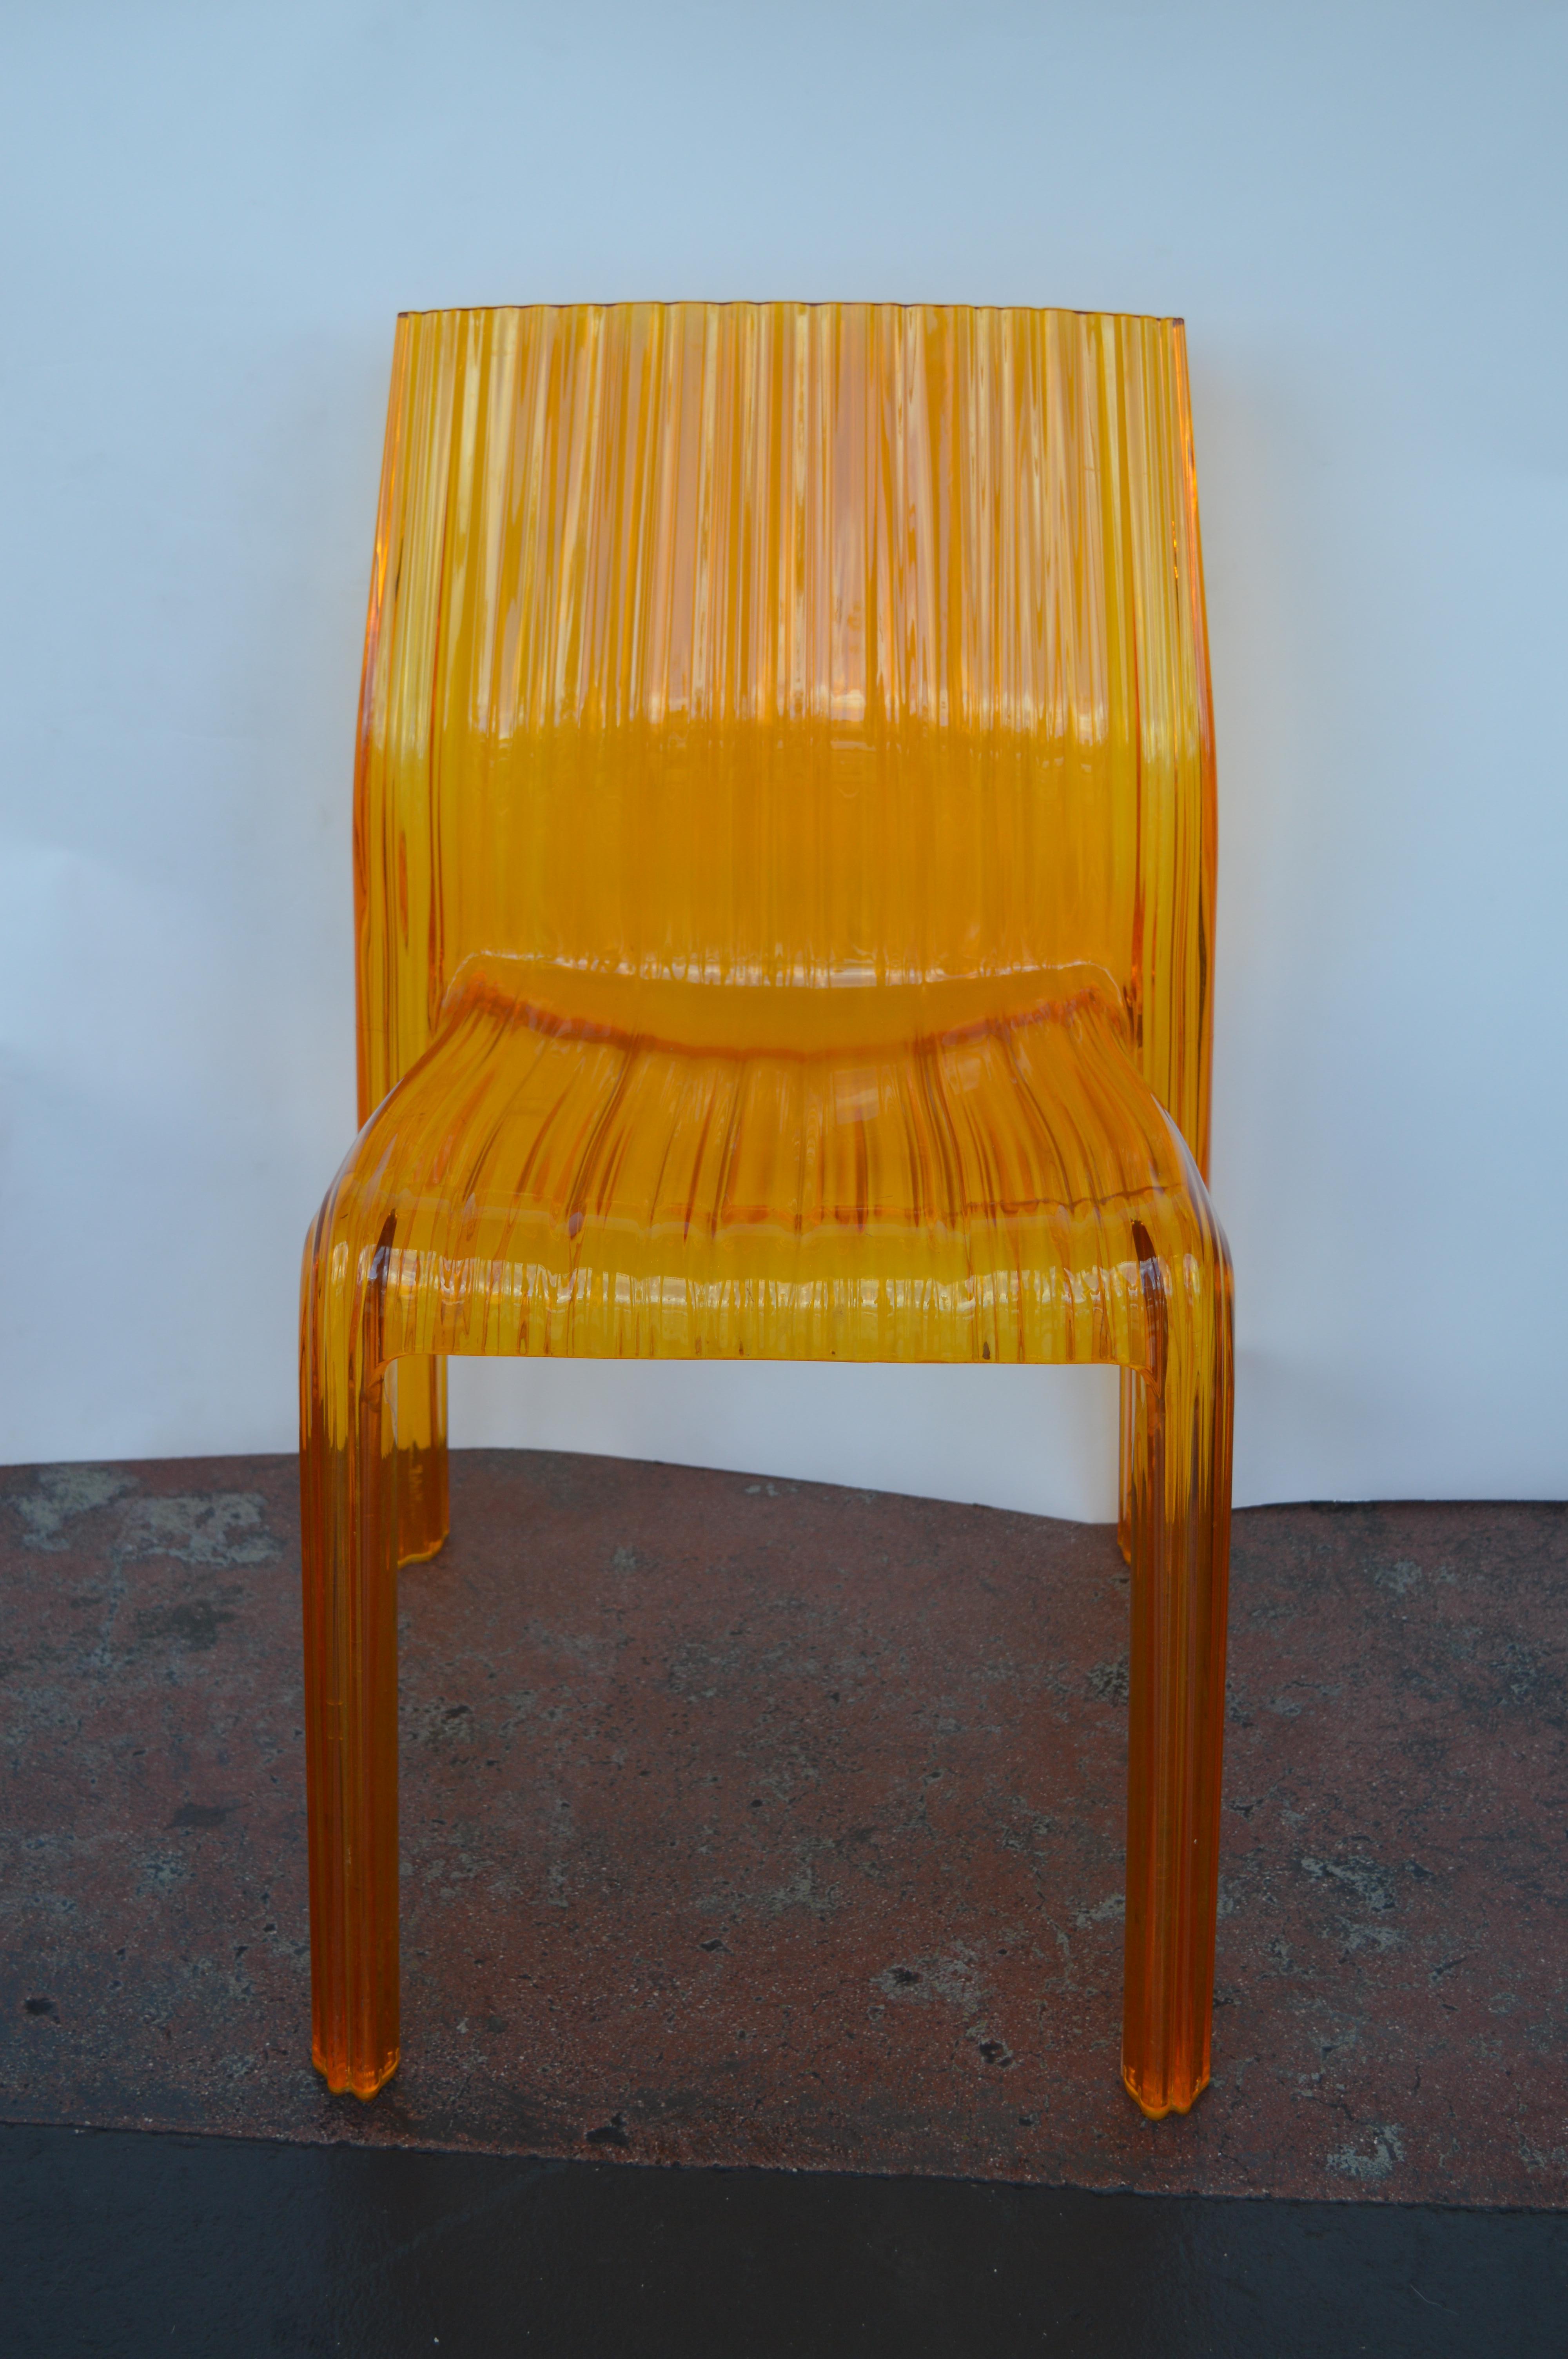 Two orange Lucite chairs by Kartell with the original stamp.